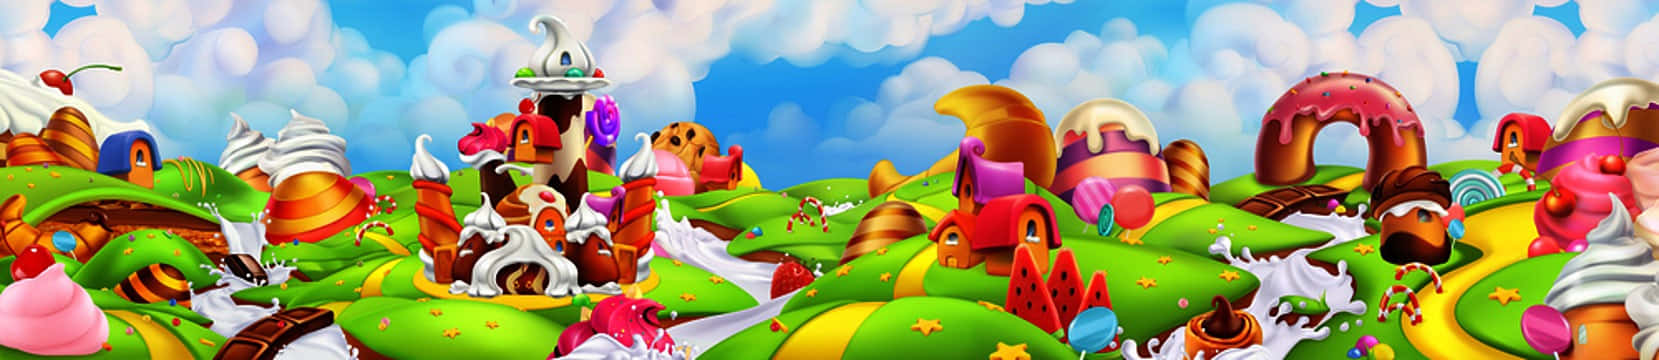 Enjoy a colorful world of sweetness with Candy Land Wallpaper